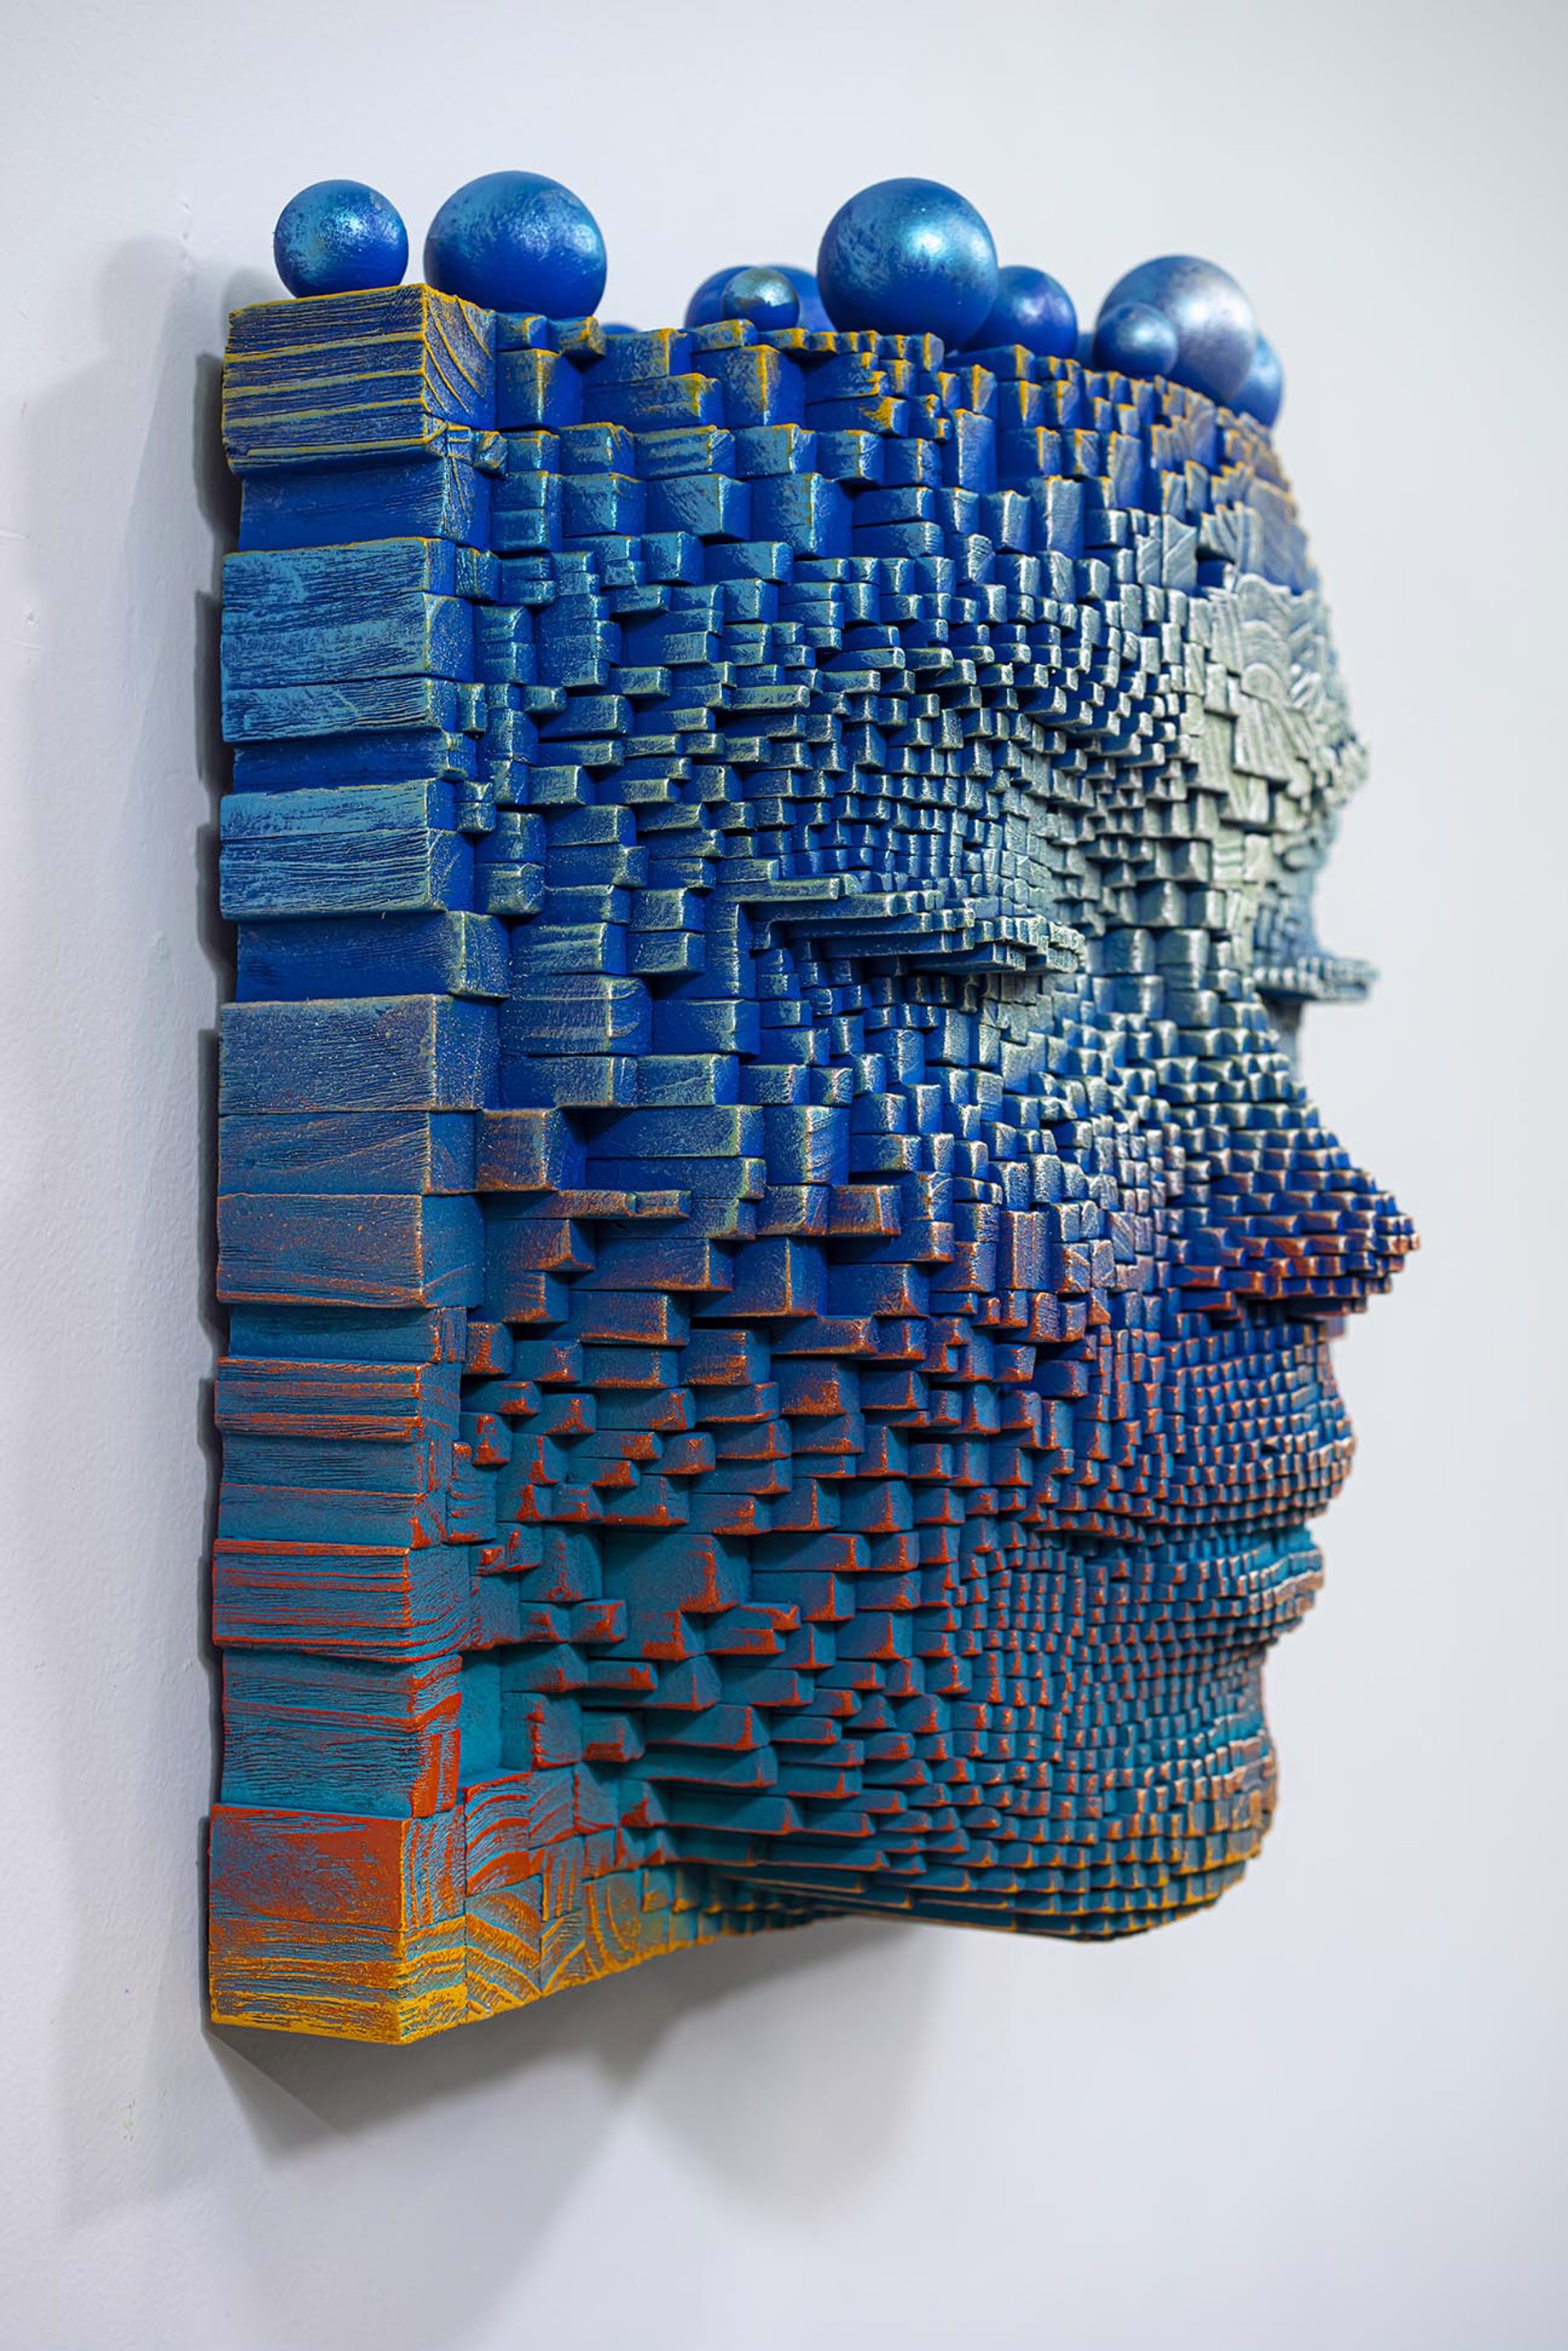 Mask #225 by Gil Bruvel